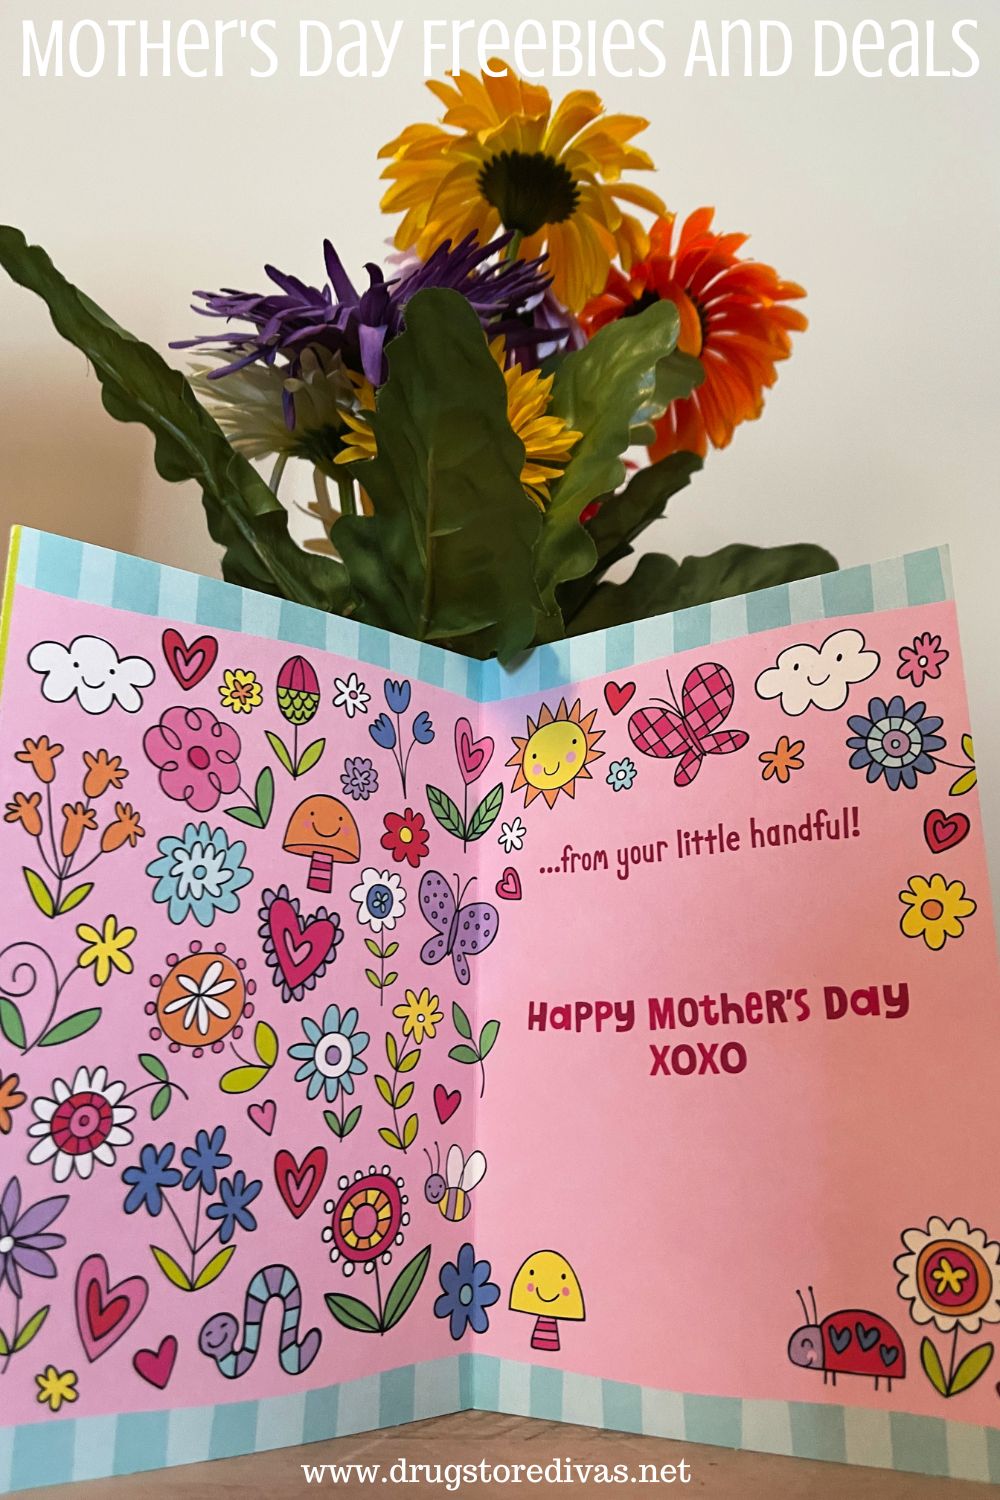 A Mother's Day card in front of flowers with the words 